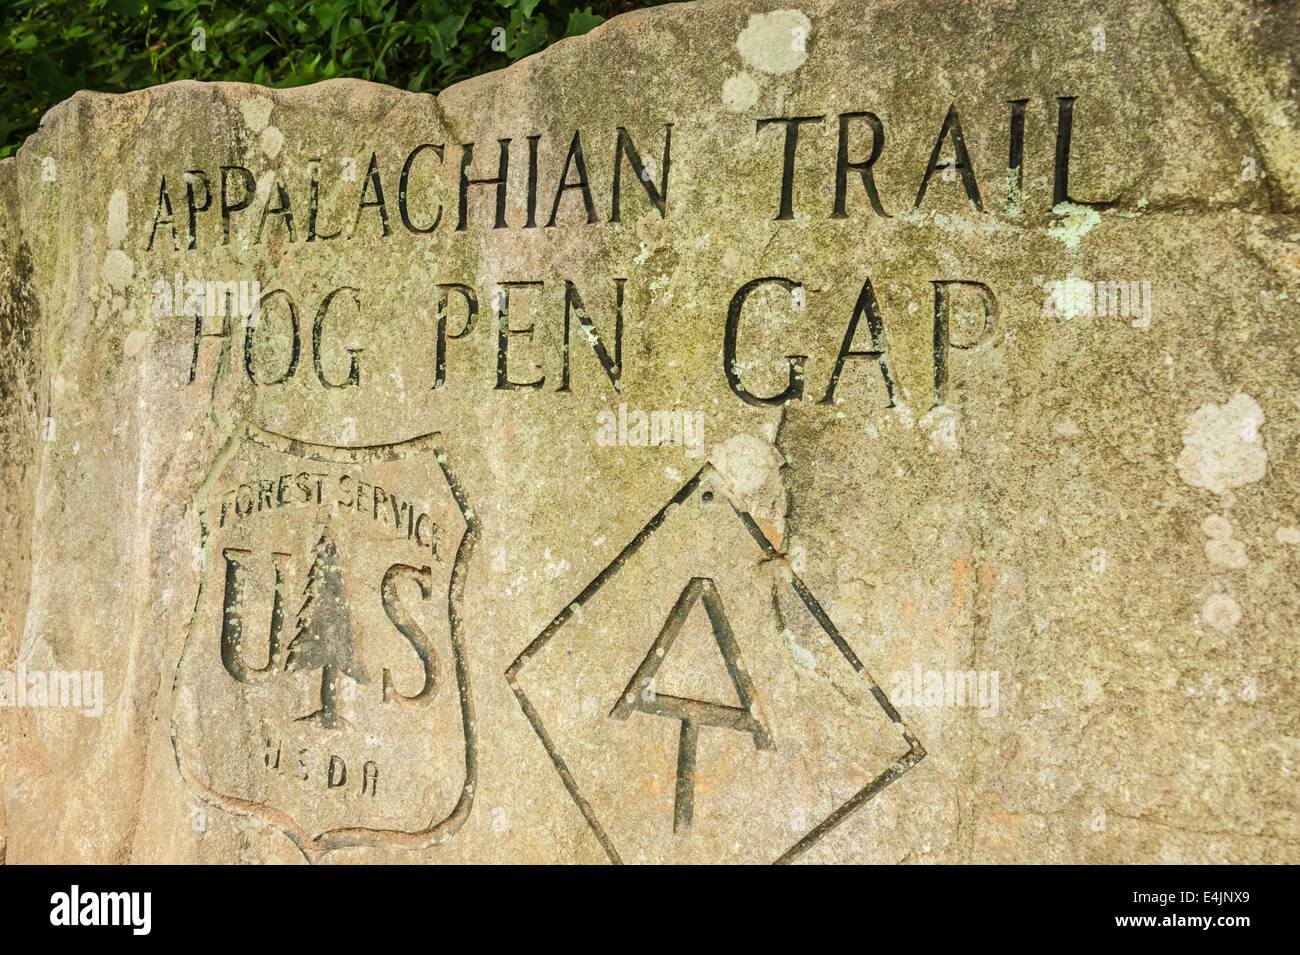 Stone marker where the Appalachian Trail meets the Richard B. Russell Scenic Highway at Hog Pen Gap in North Georgia, USA. Stock Photo